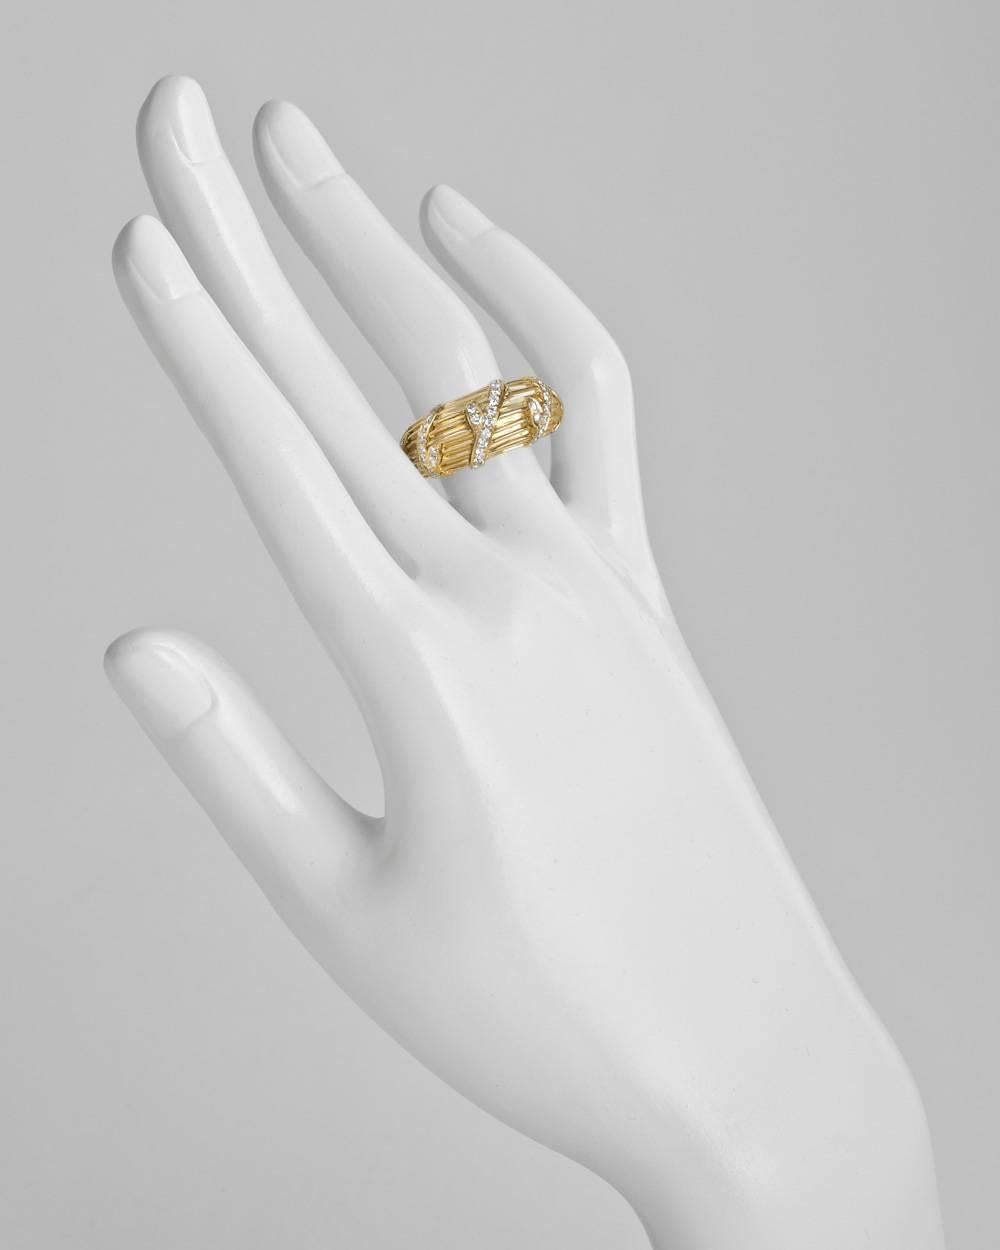 Band ring, accented by a five section diamond-set vine motif to the front, in 18k yellow gold, numbered 005447 and signed Cartier, stamped 1994. 12.3mm band width. Size 4.5 (European - size 48). This ring cannot be re-sized.
